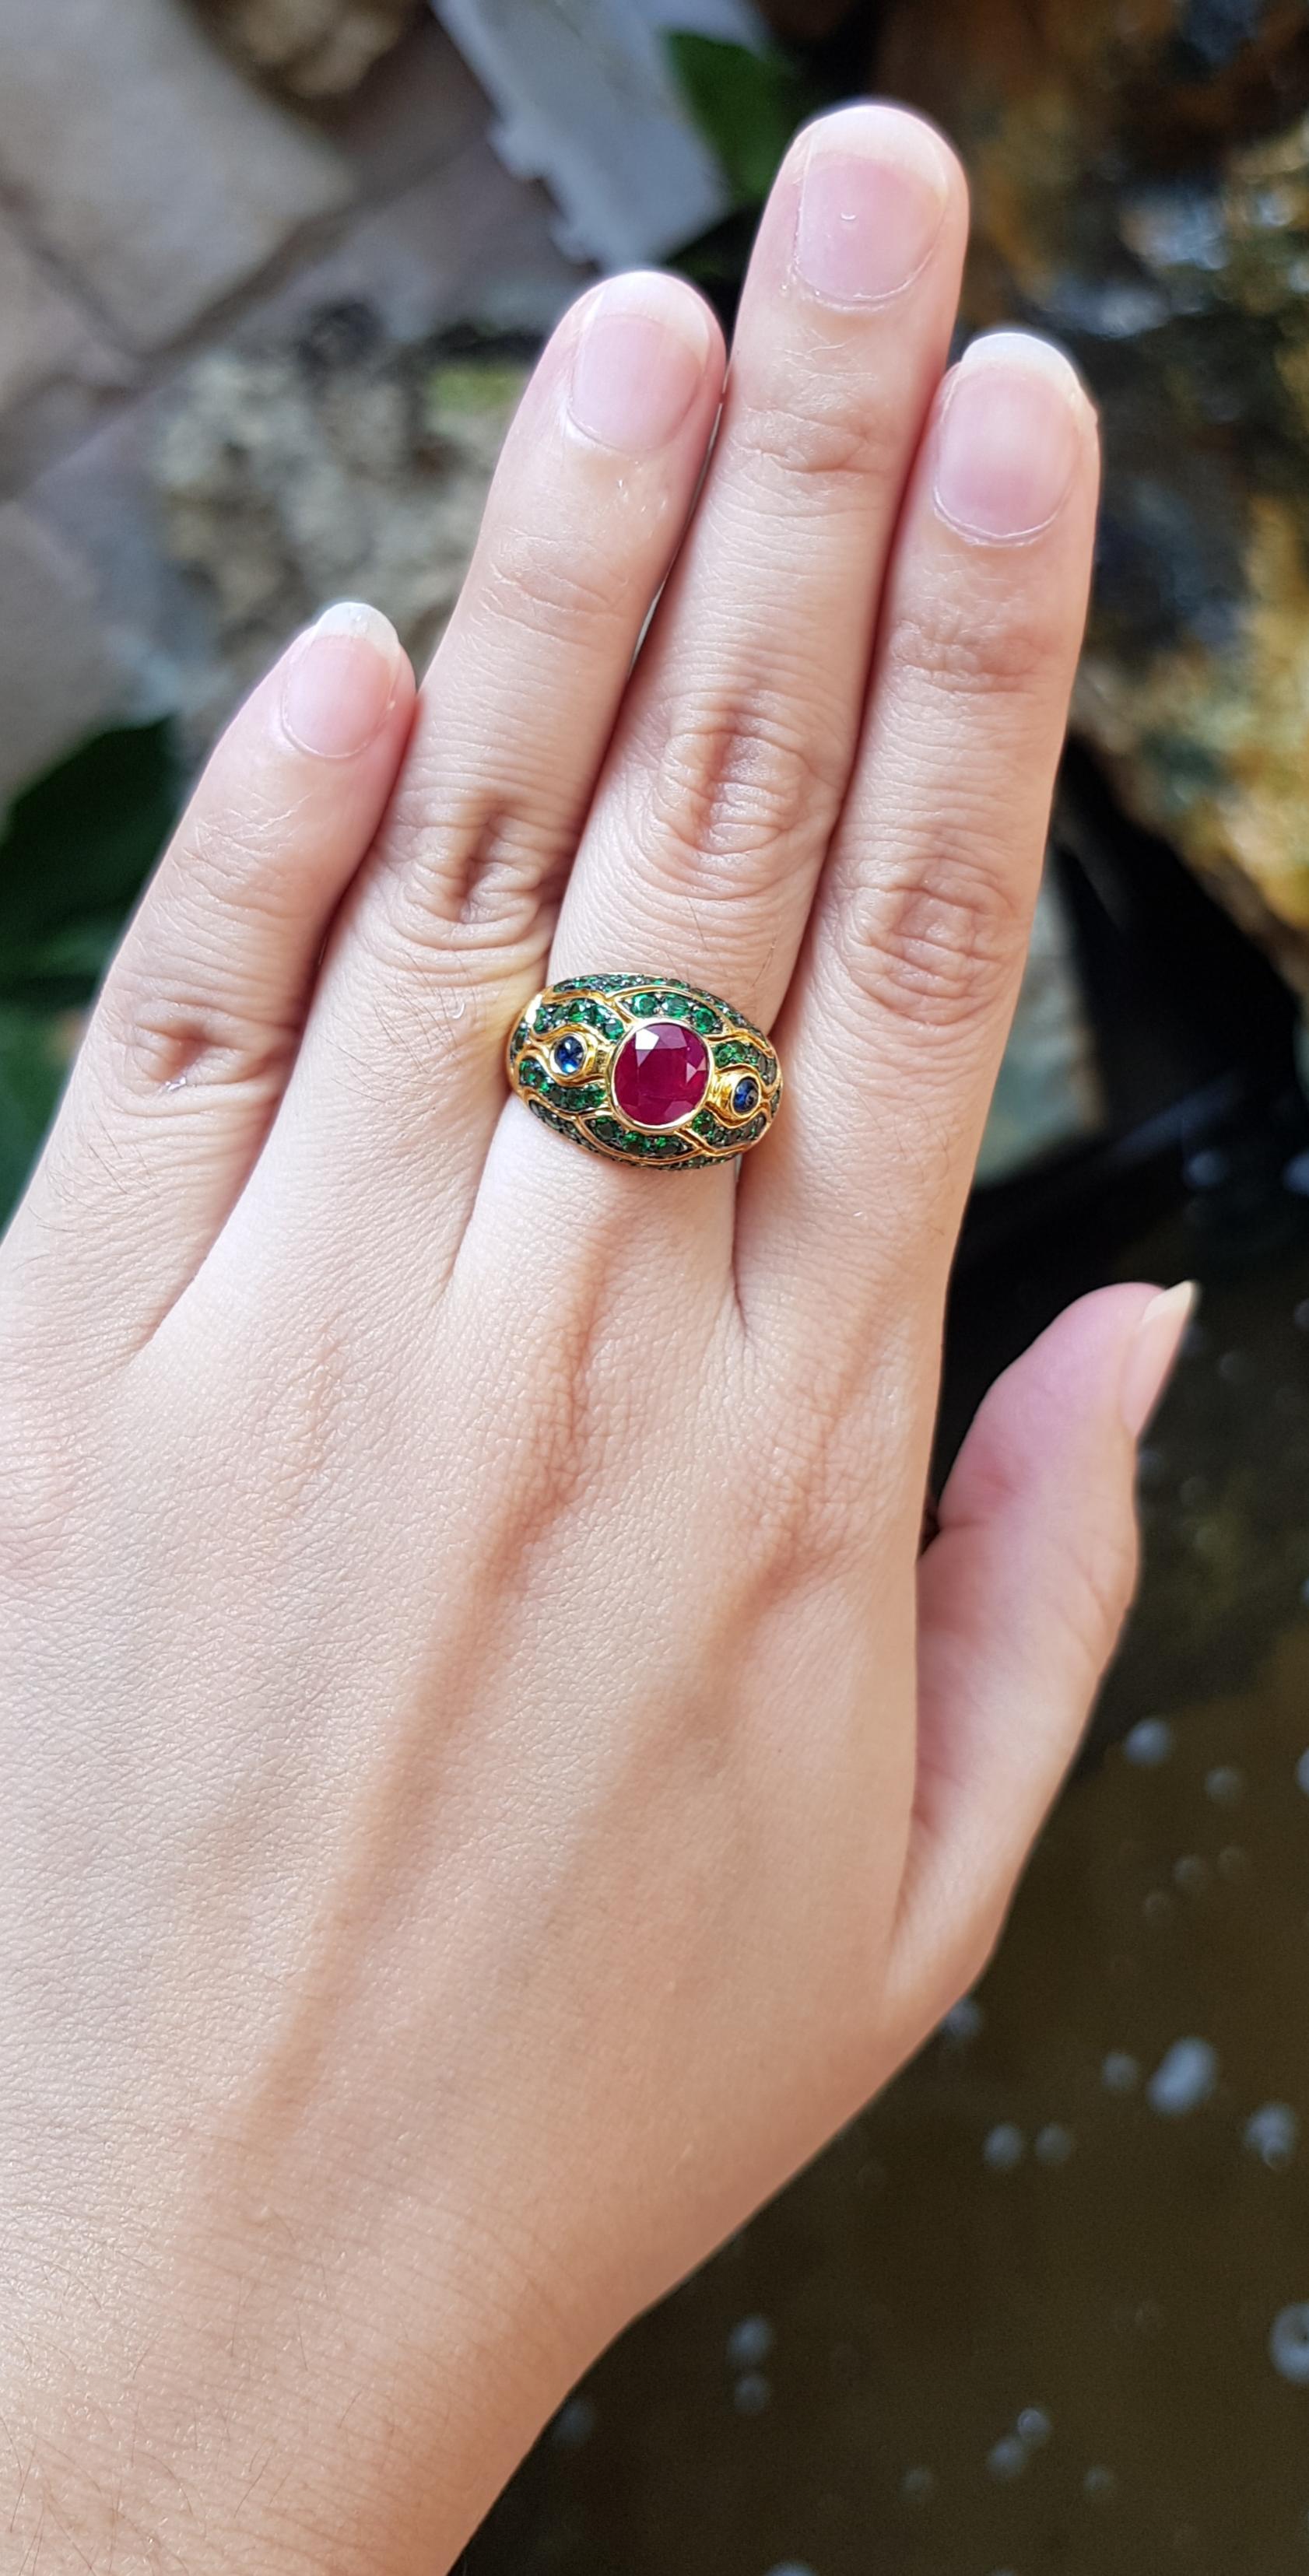 Ruby 2.01 carats with Cabochon Blue Sapphire 0.27 and Tsavorite 1.23 carats Ring set in 18 Karat Gold Settings

Width:  1.5 cm 
Length: 1.3 cm
Ring Size: 50
Total Weight: 5.98 grams

